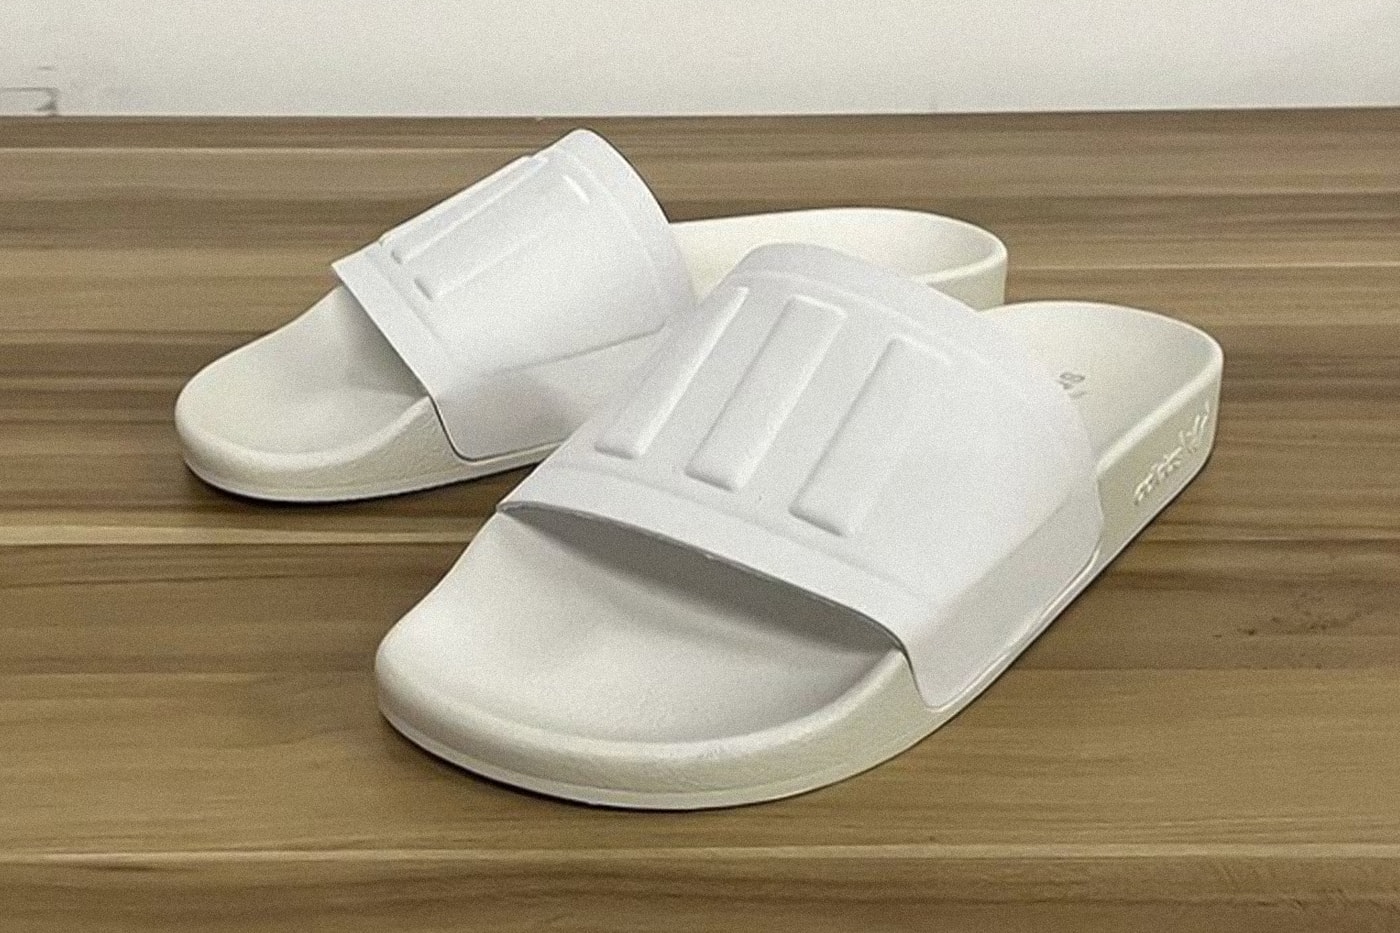 adidas Fear of God Athletics Slides First Look Release Info Date Buy Price Jerry Lorenzo